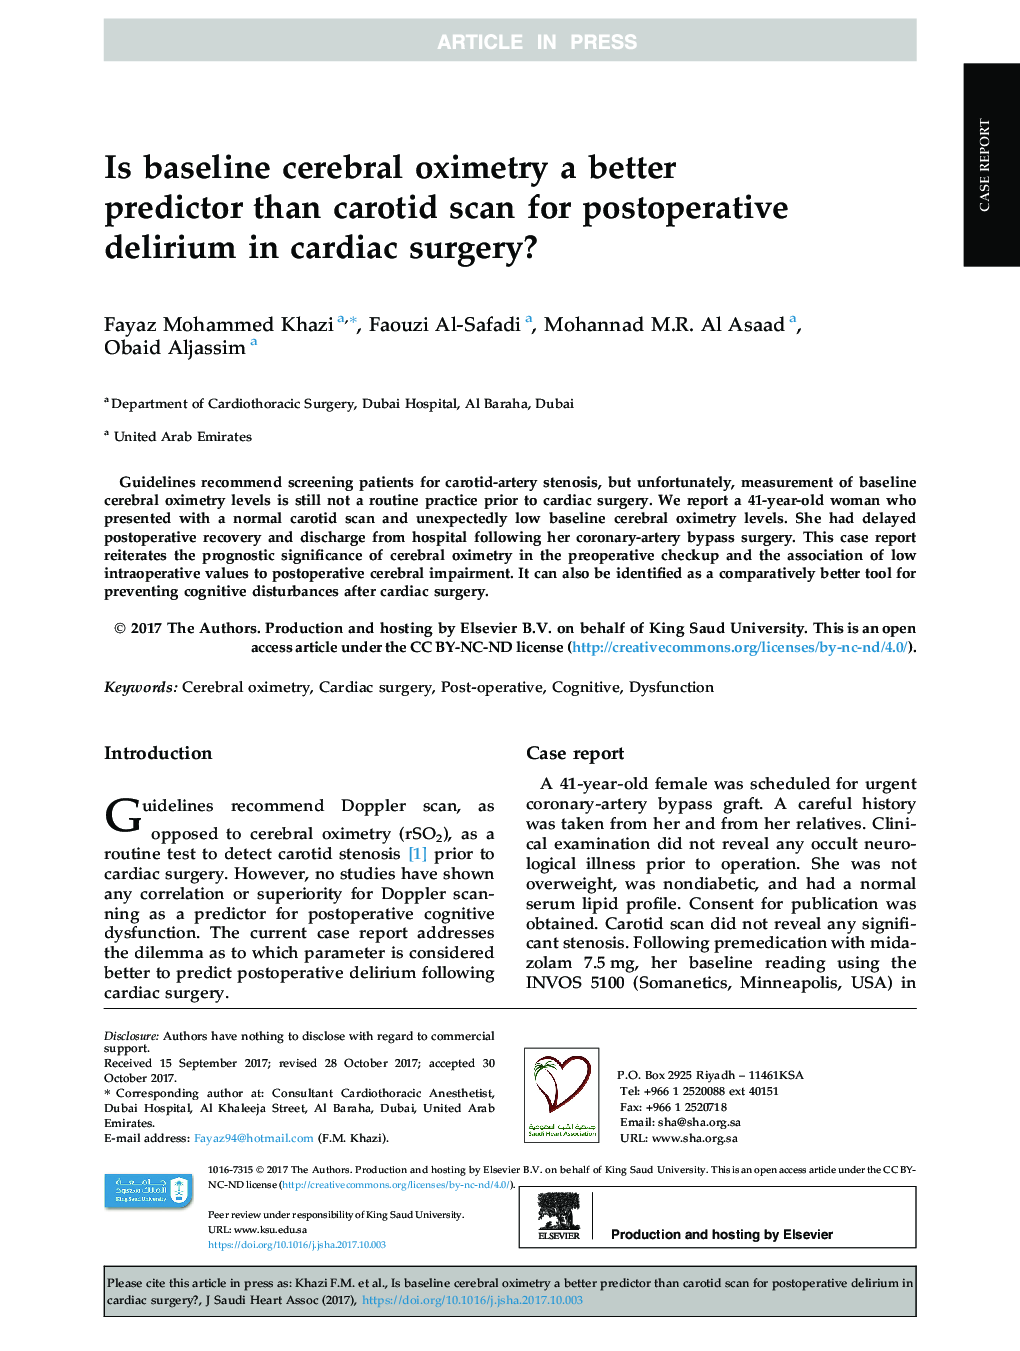 Is baseline cerebral oximetry a better predictor than carotid scan for postoperative delirium in cardiac surgery?